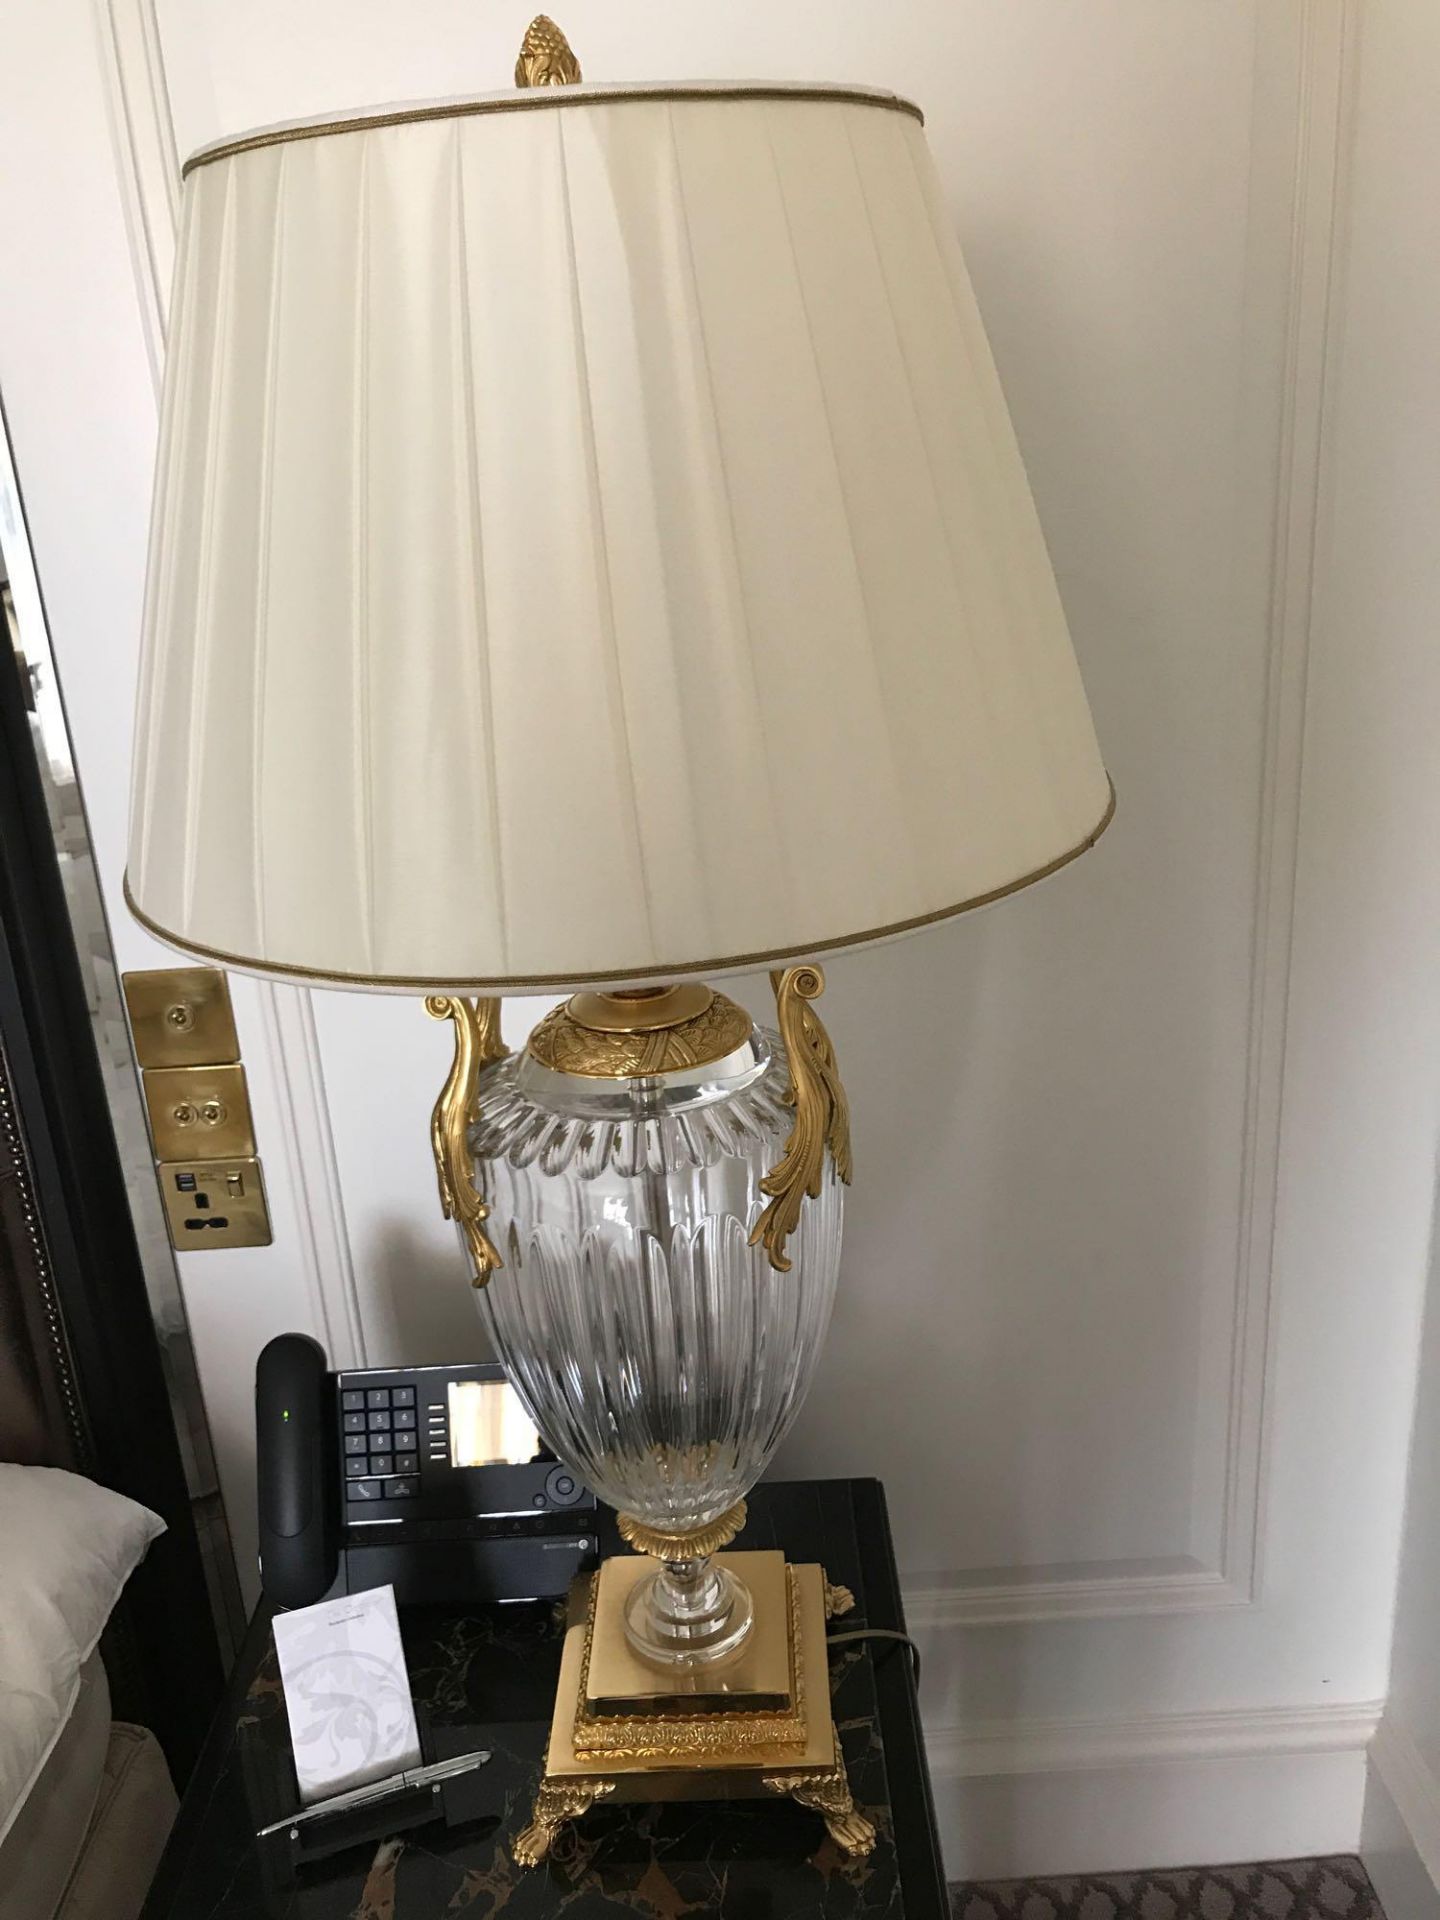 A Pair Of Laudarte Crystal Table Lamps Inserts And Decorations In 24ct Gold With Shade 95cm Tall - Bild 2 aus 2